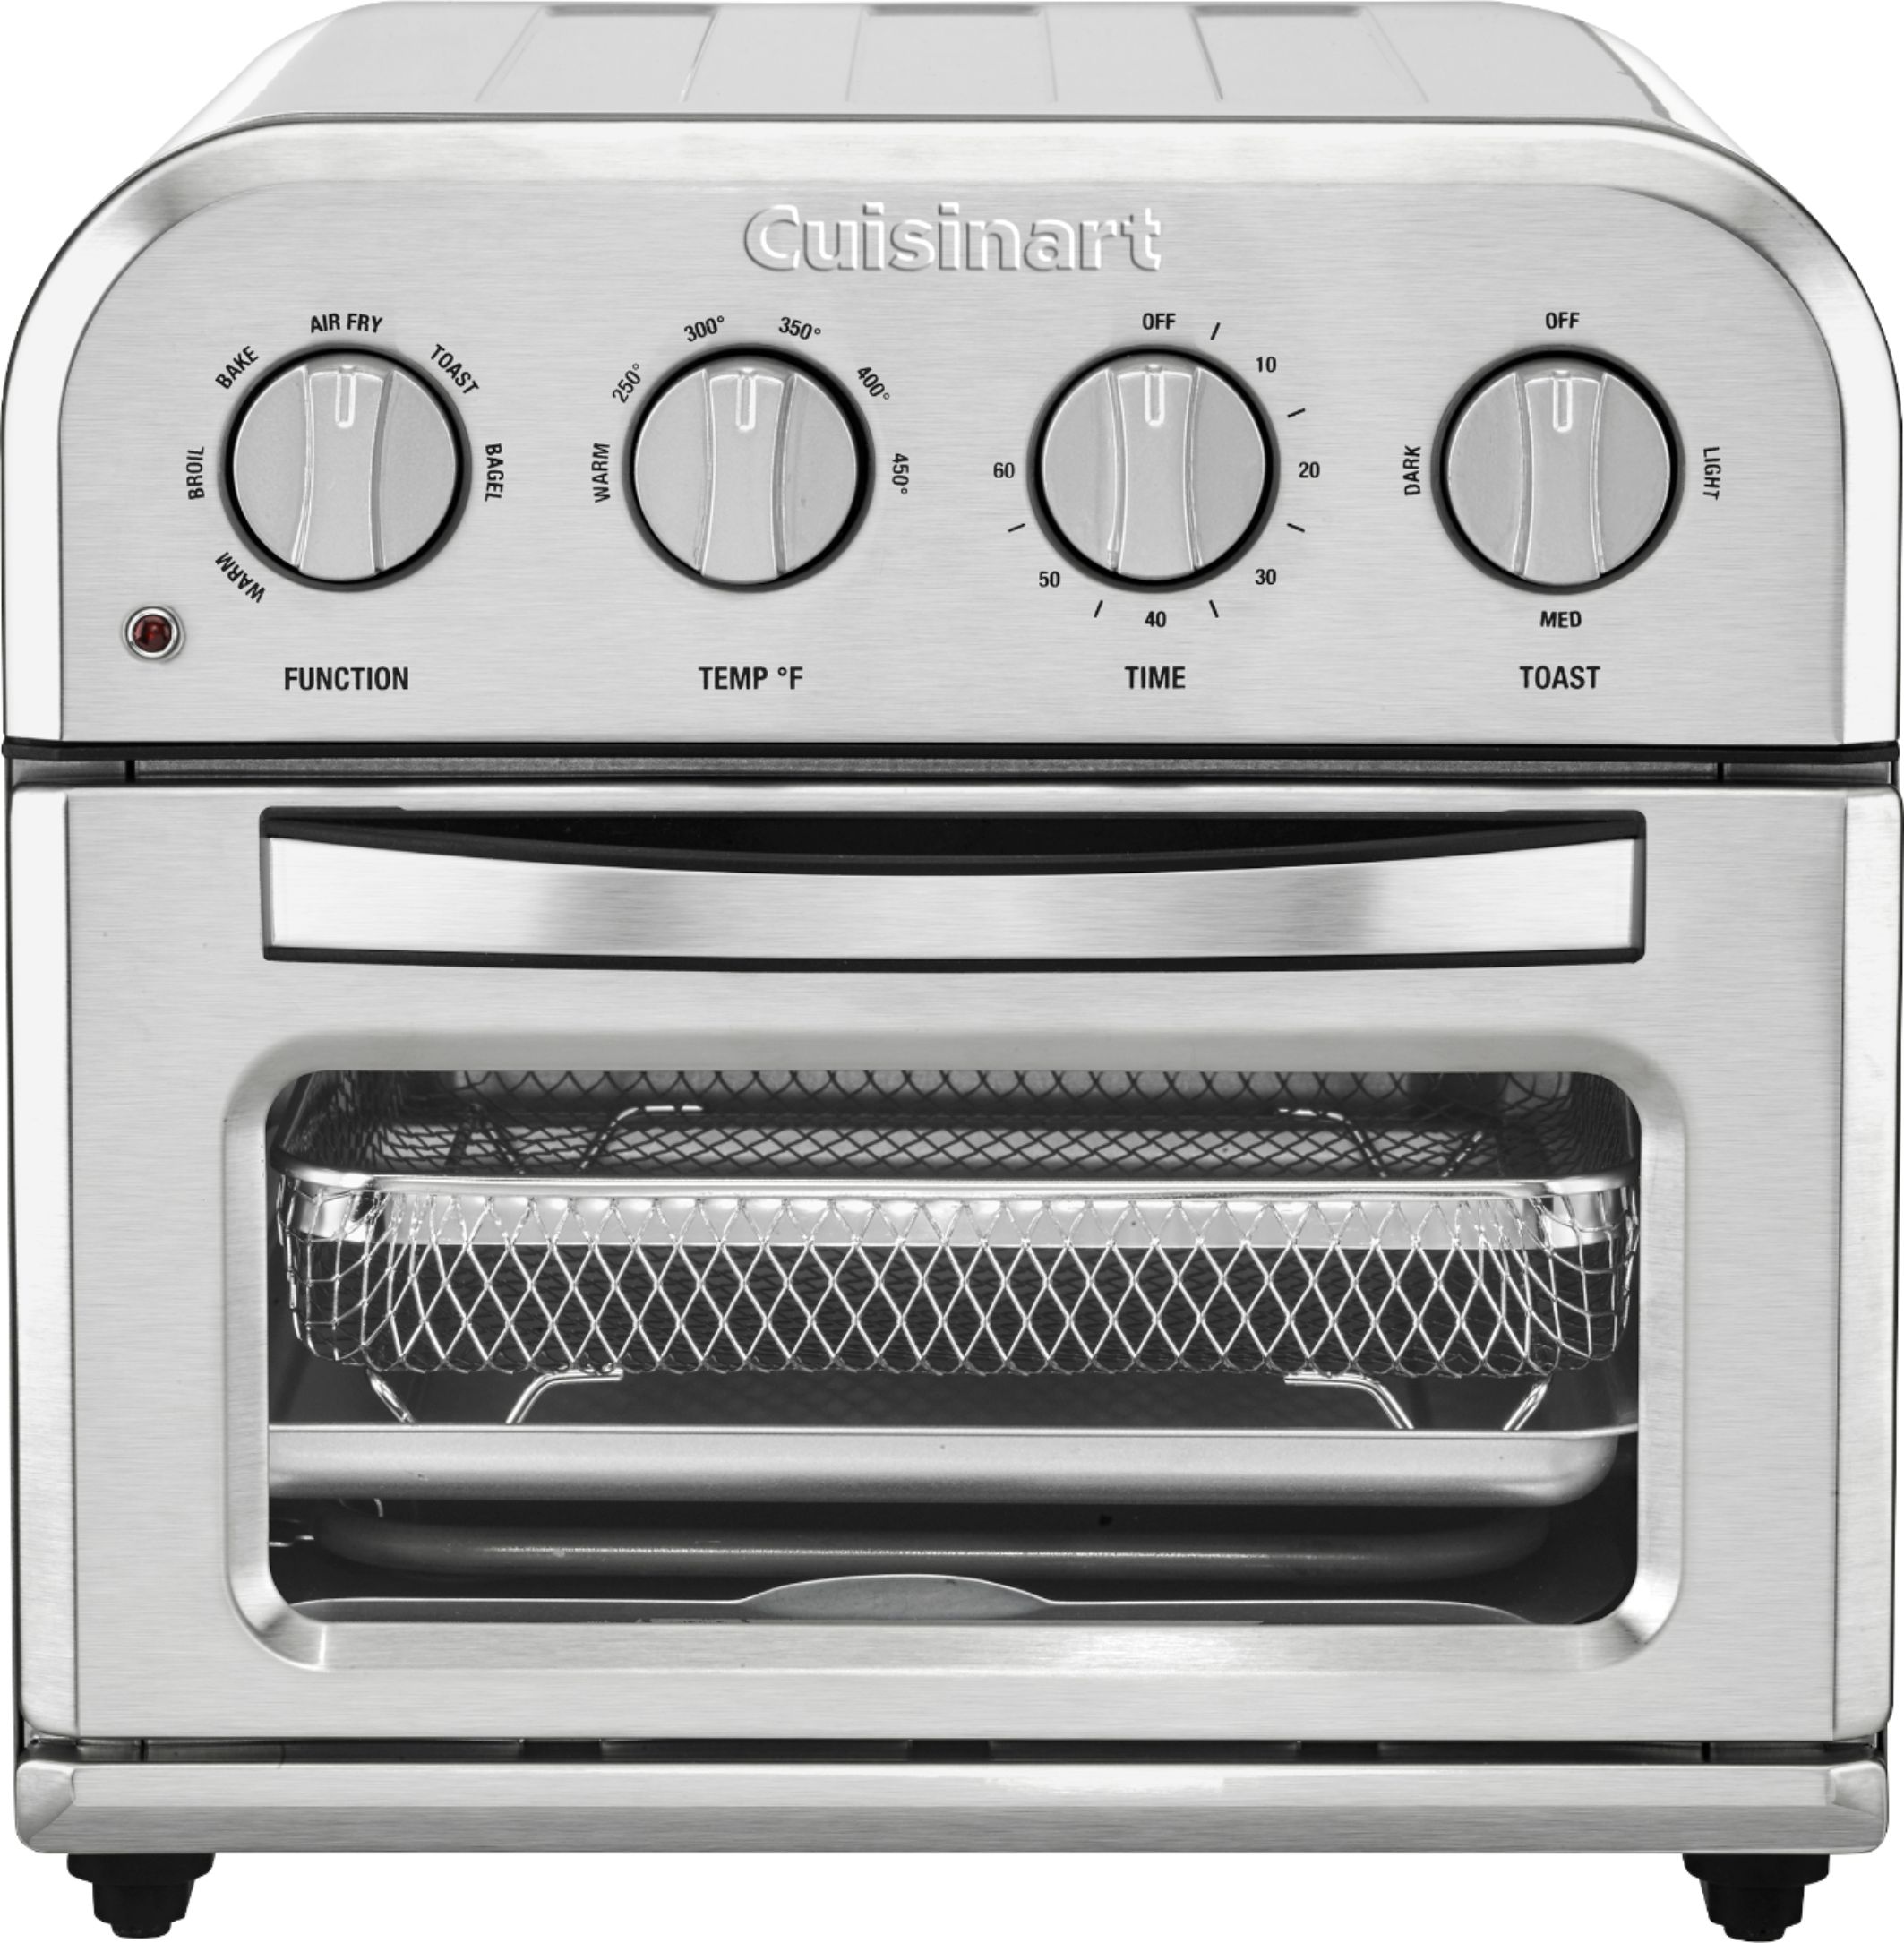 Cuisinart Air Fryer Toaster Oven Review from COSTCO! 